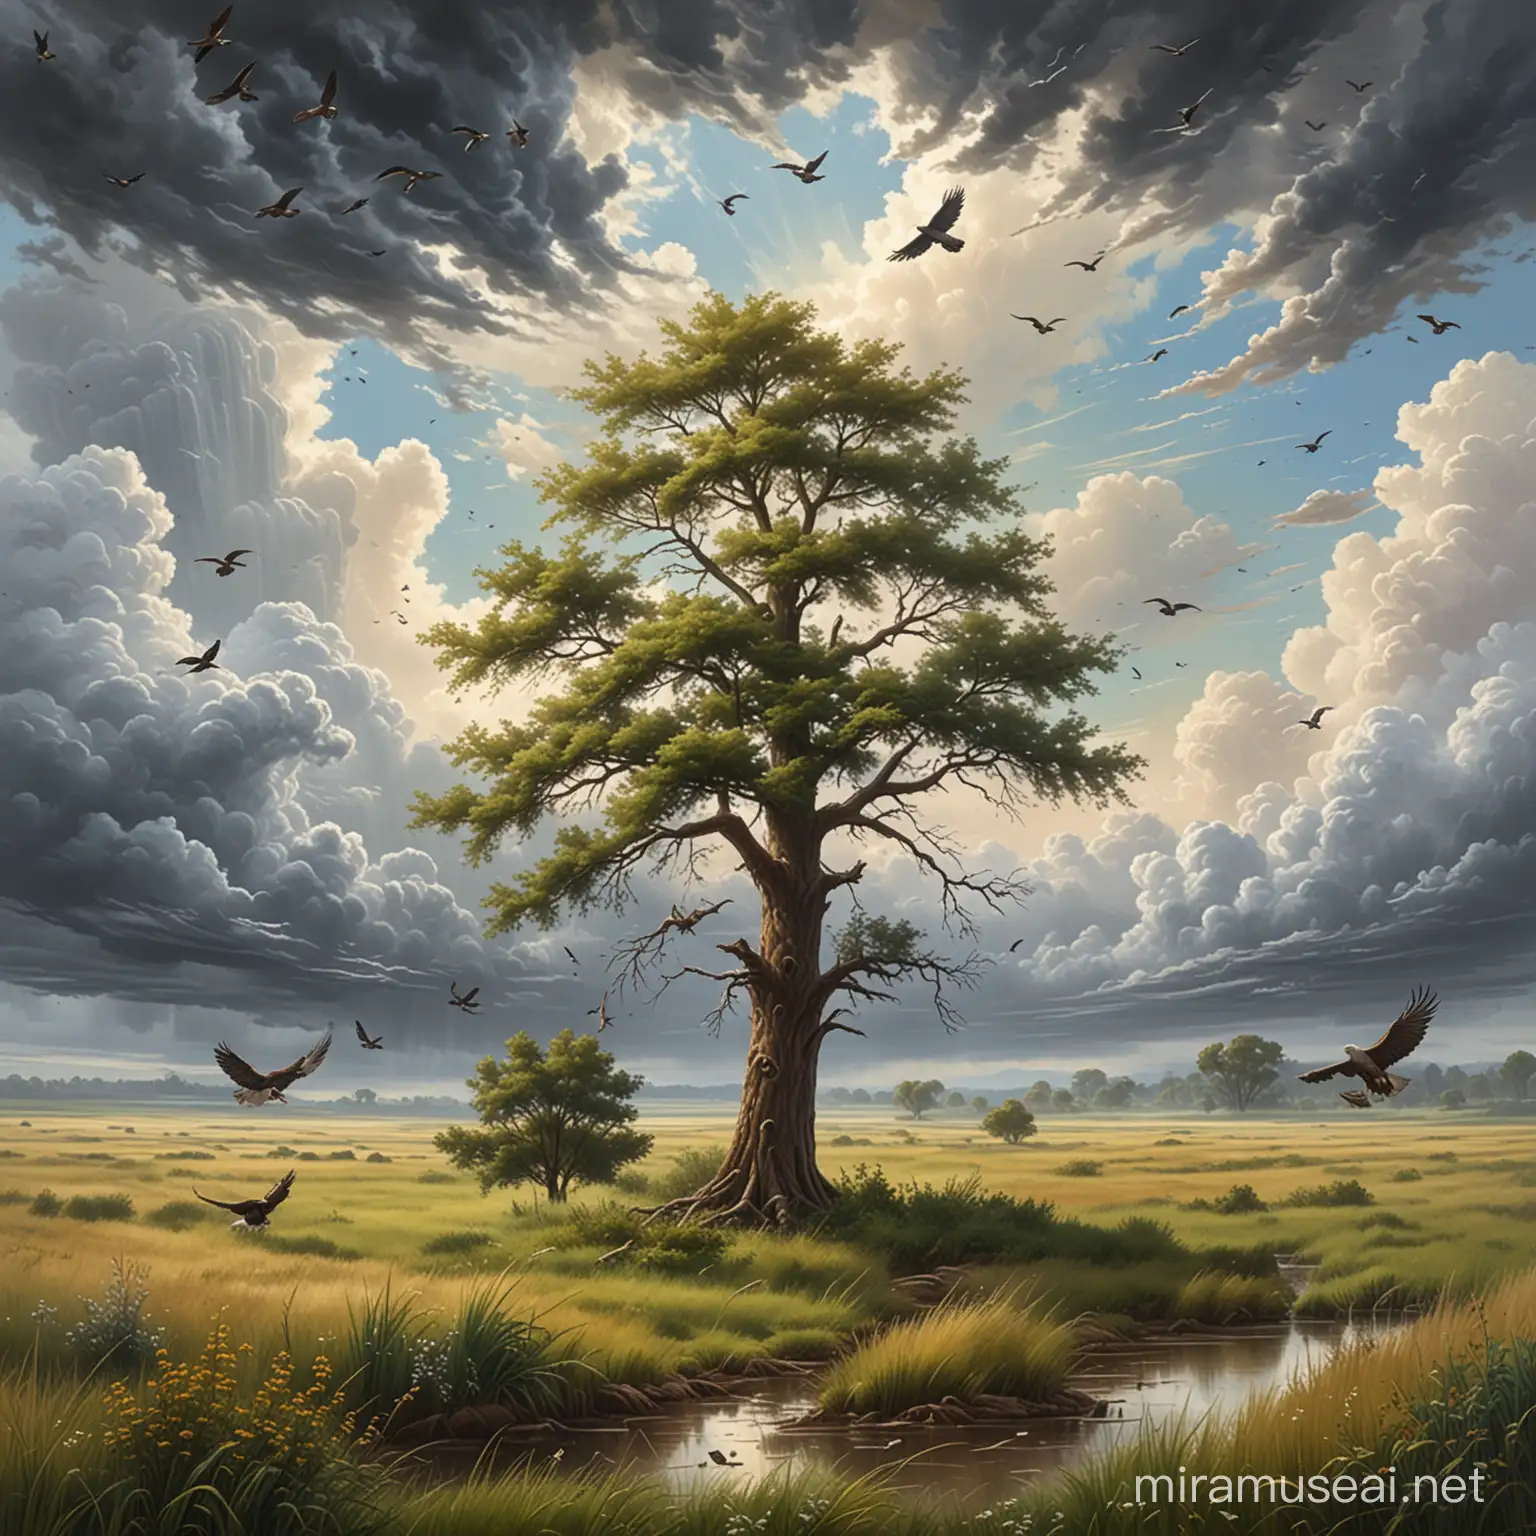 It is a painting or drawing showing the scene outdoors with a sky filled with clouds and birds like Giant eagles flying around. The image shows a tree standing in a field under a cloudy sky. It depicts an outdoor scene with grass and plants in a natural environment.